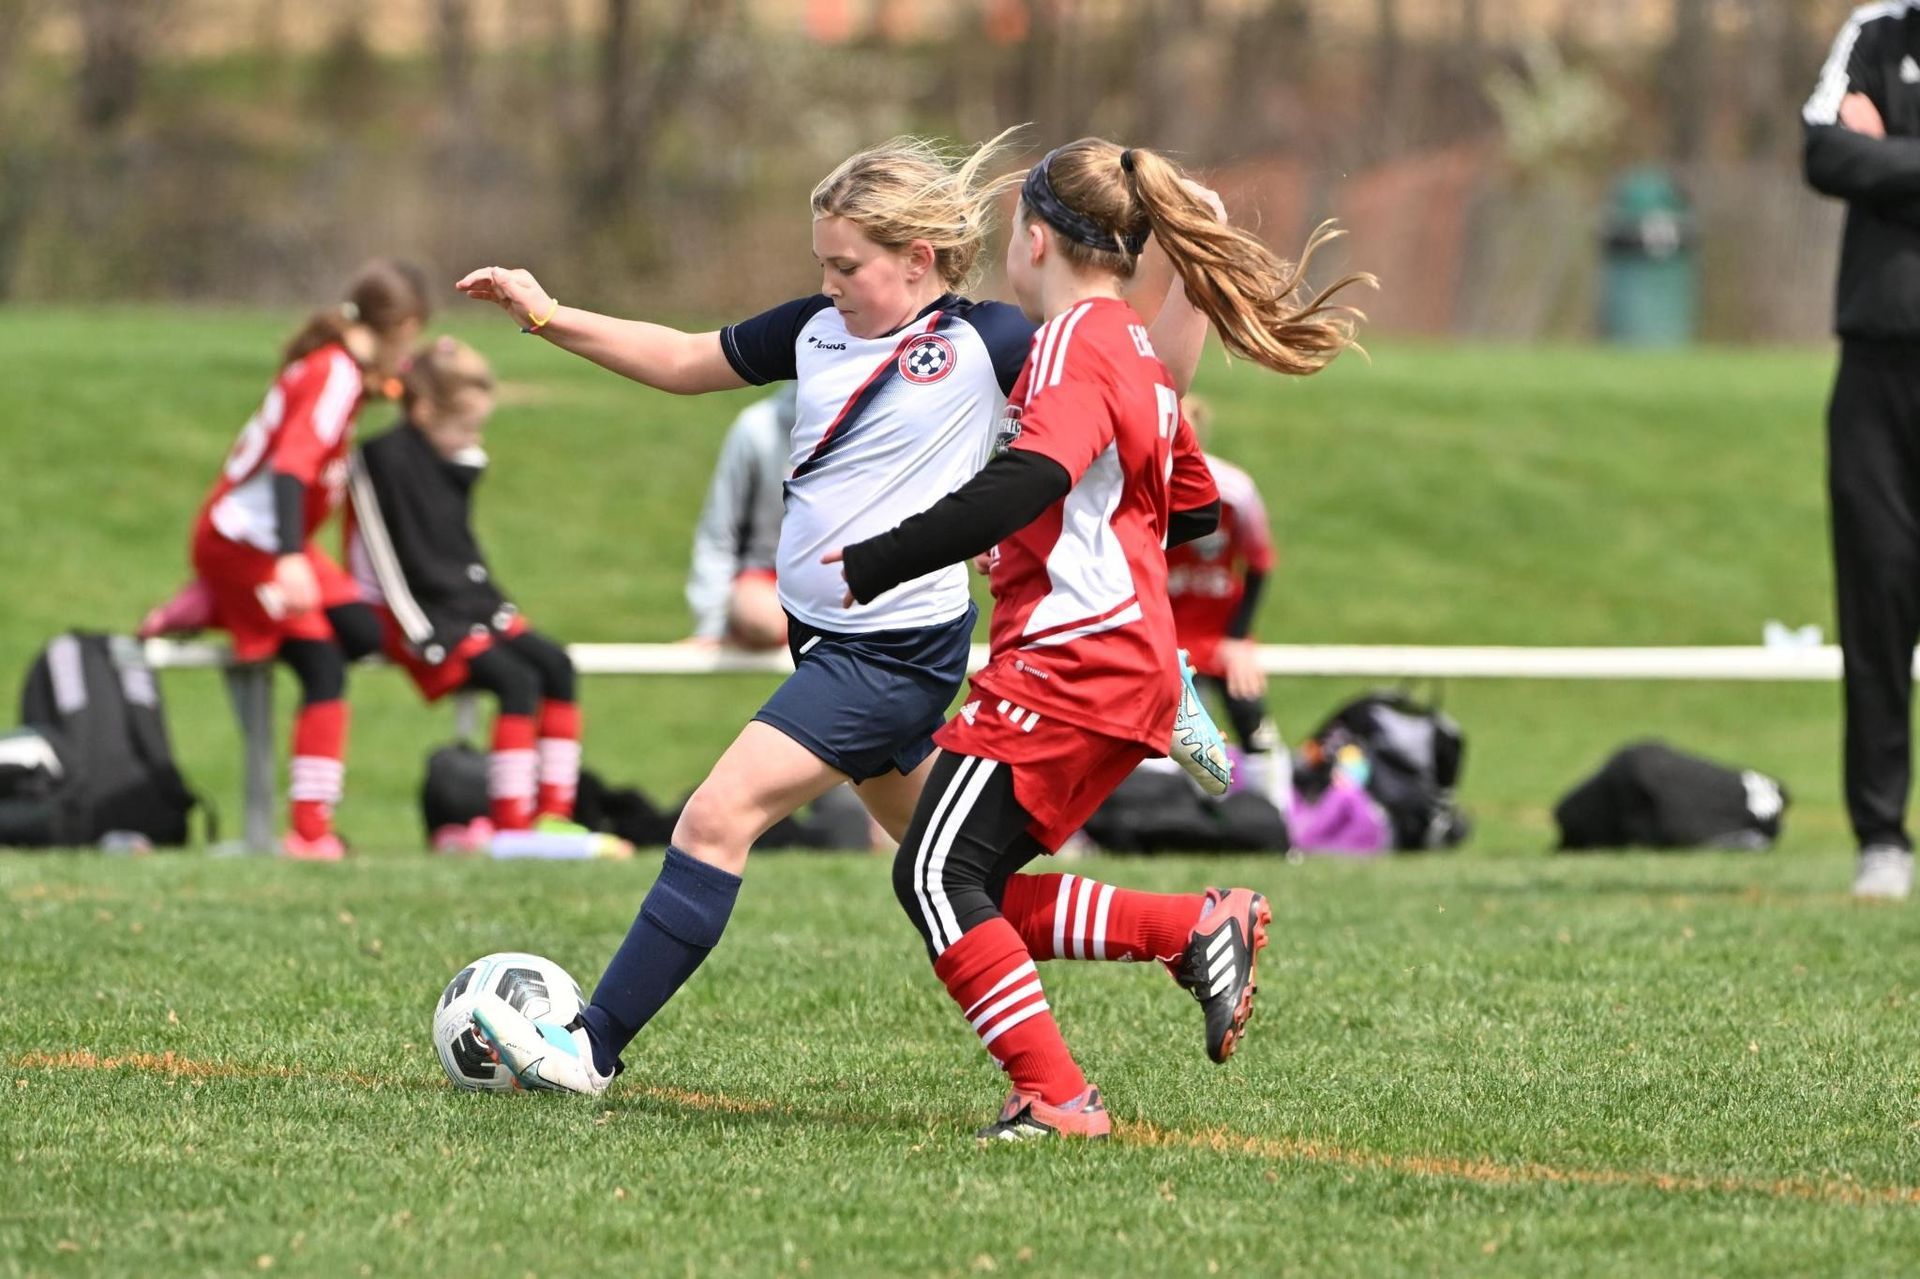 Clarke County Soccer League's female player taking a right footed shot at the top of the box. 